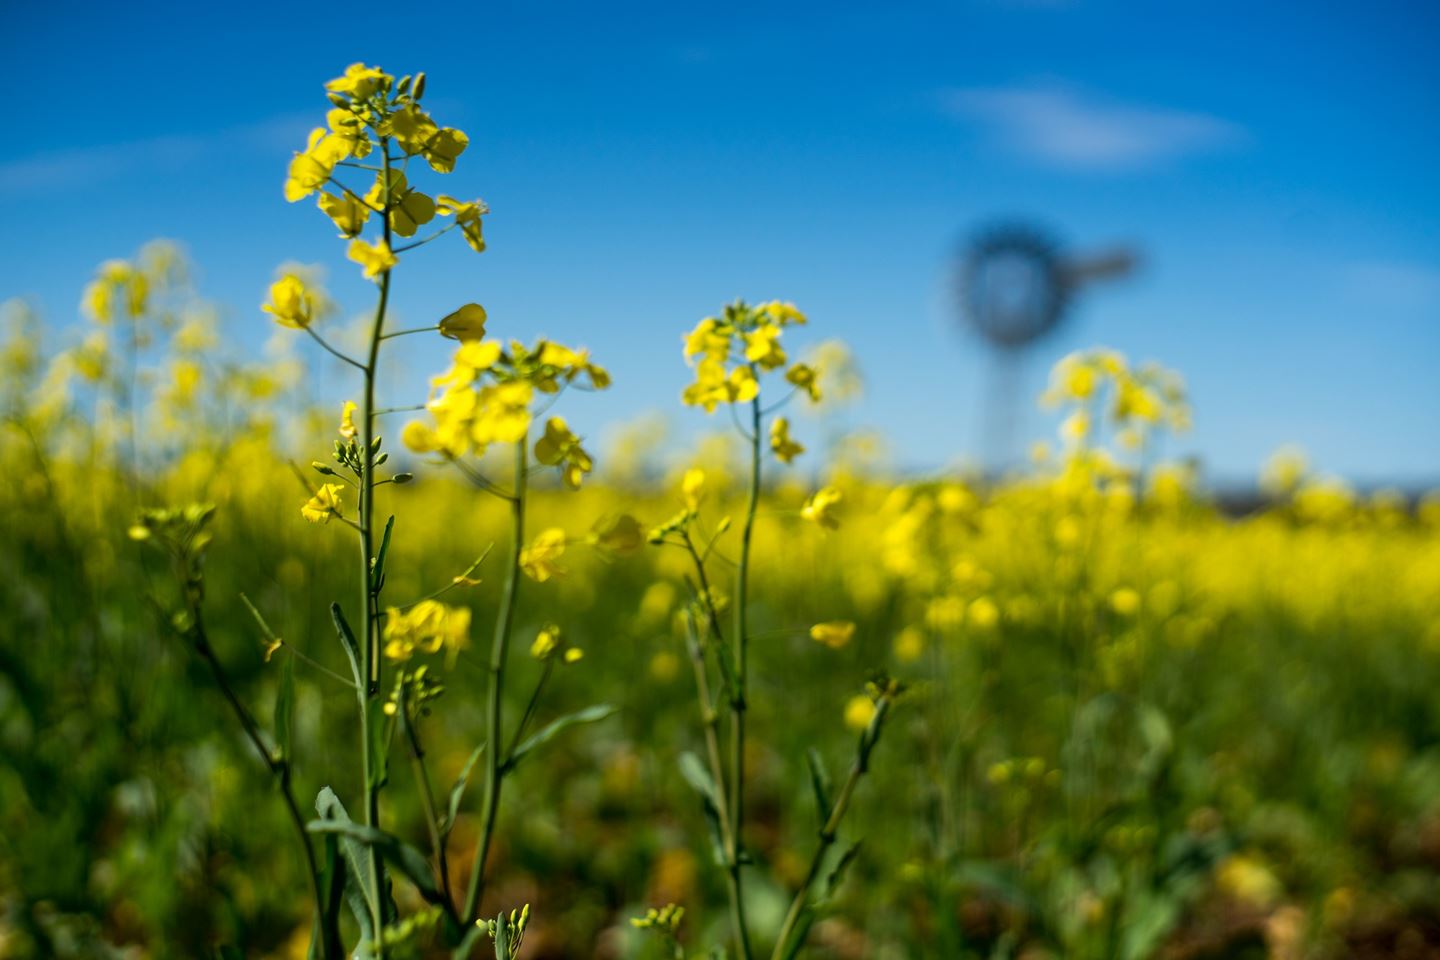 A close up shot of a canola plant flowering